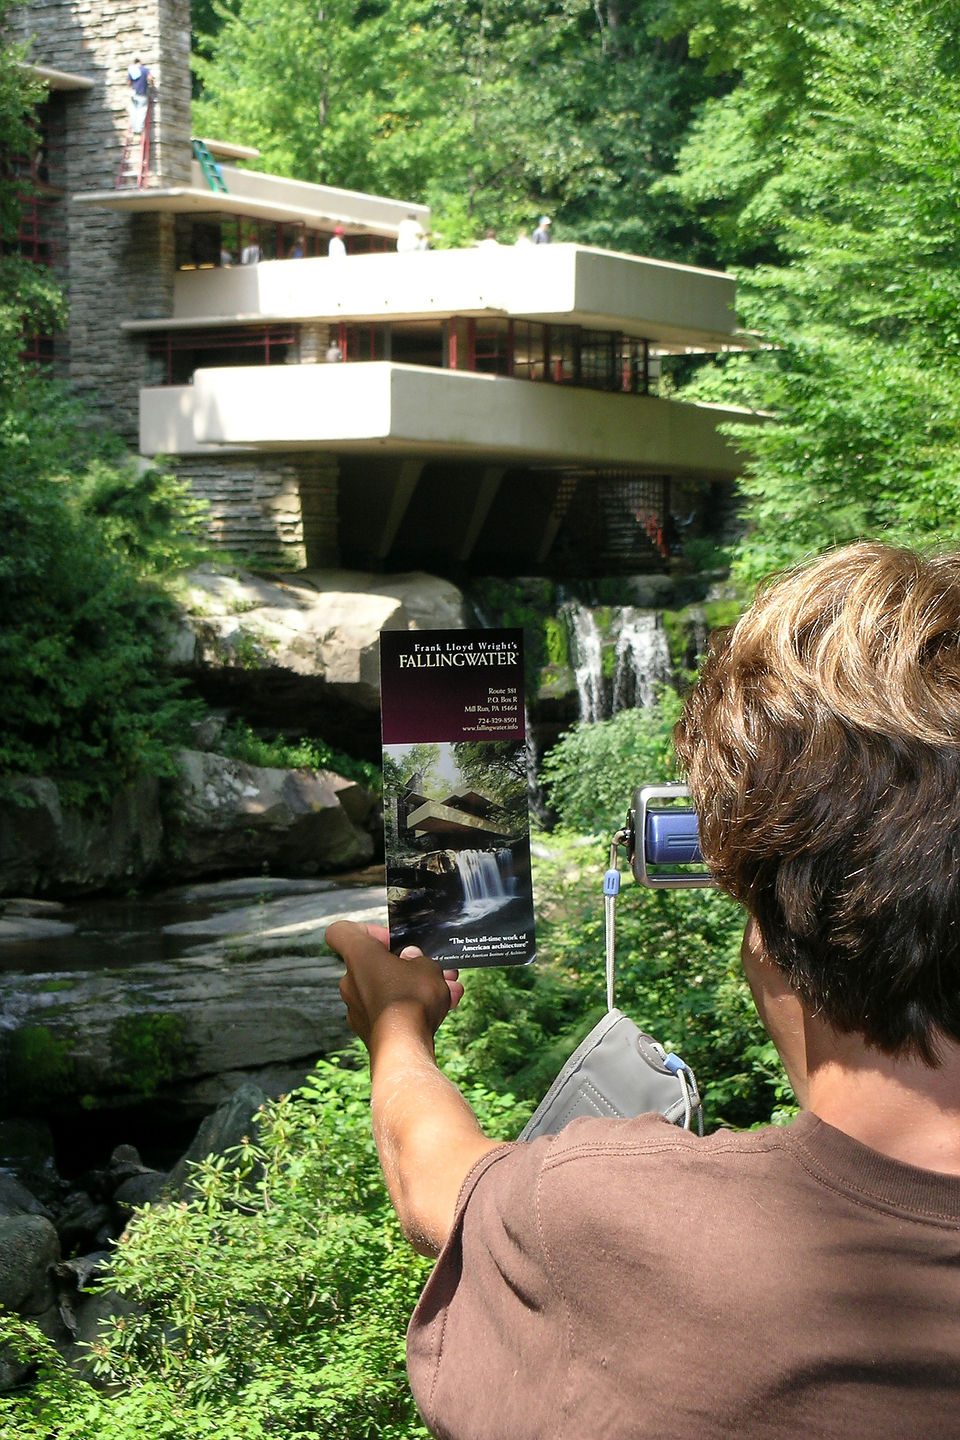 Tommy photographing Fallingwater